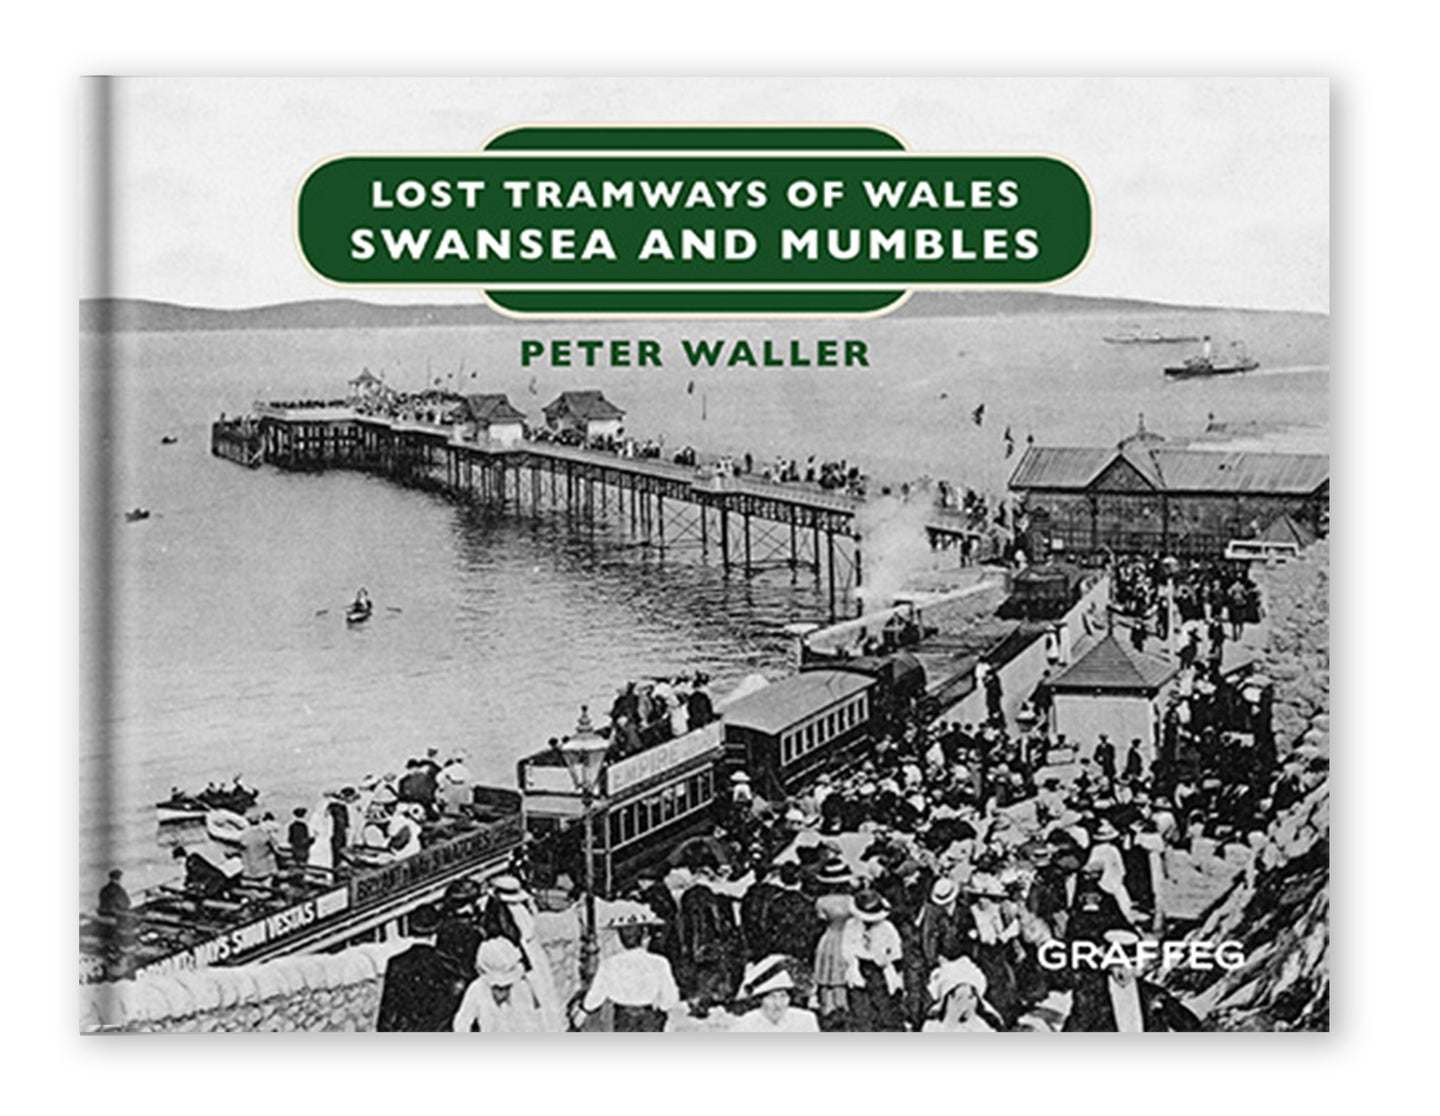 Lost Tramways of Wales: Swansea and Mumbles